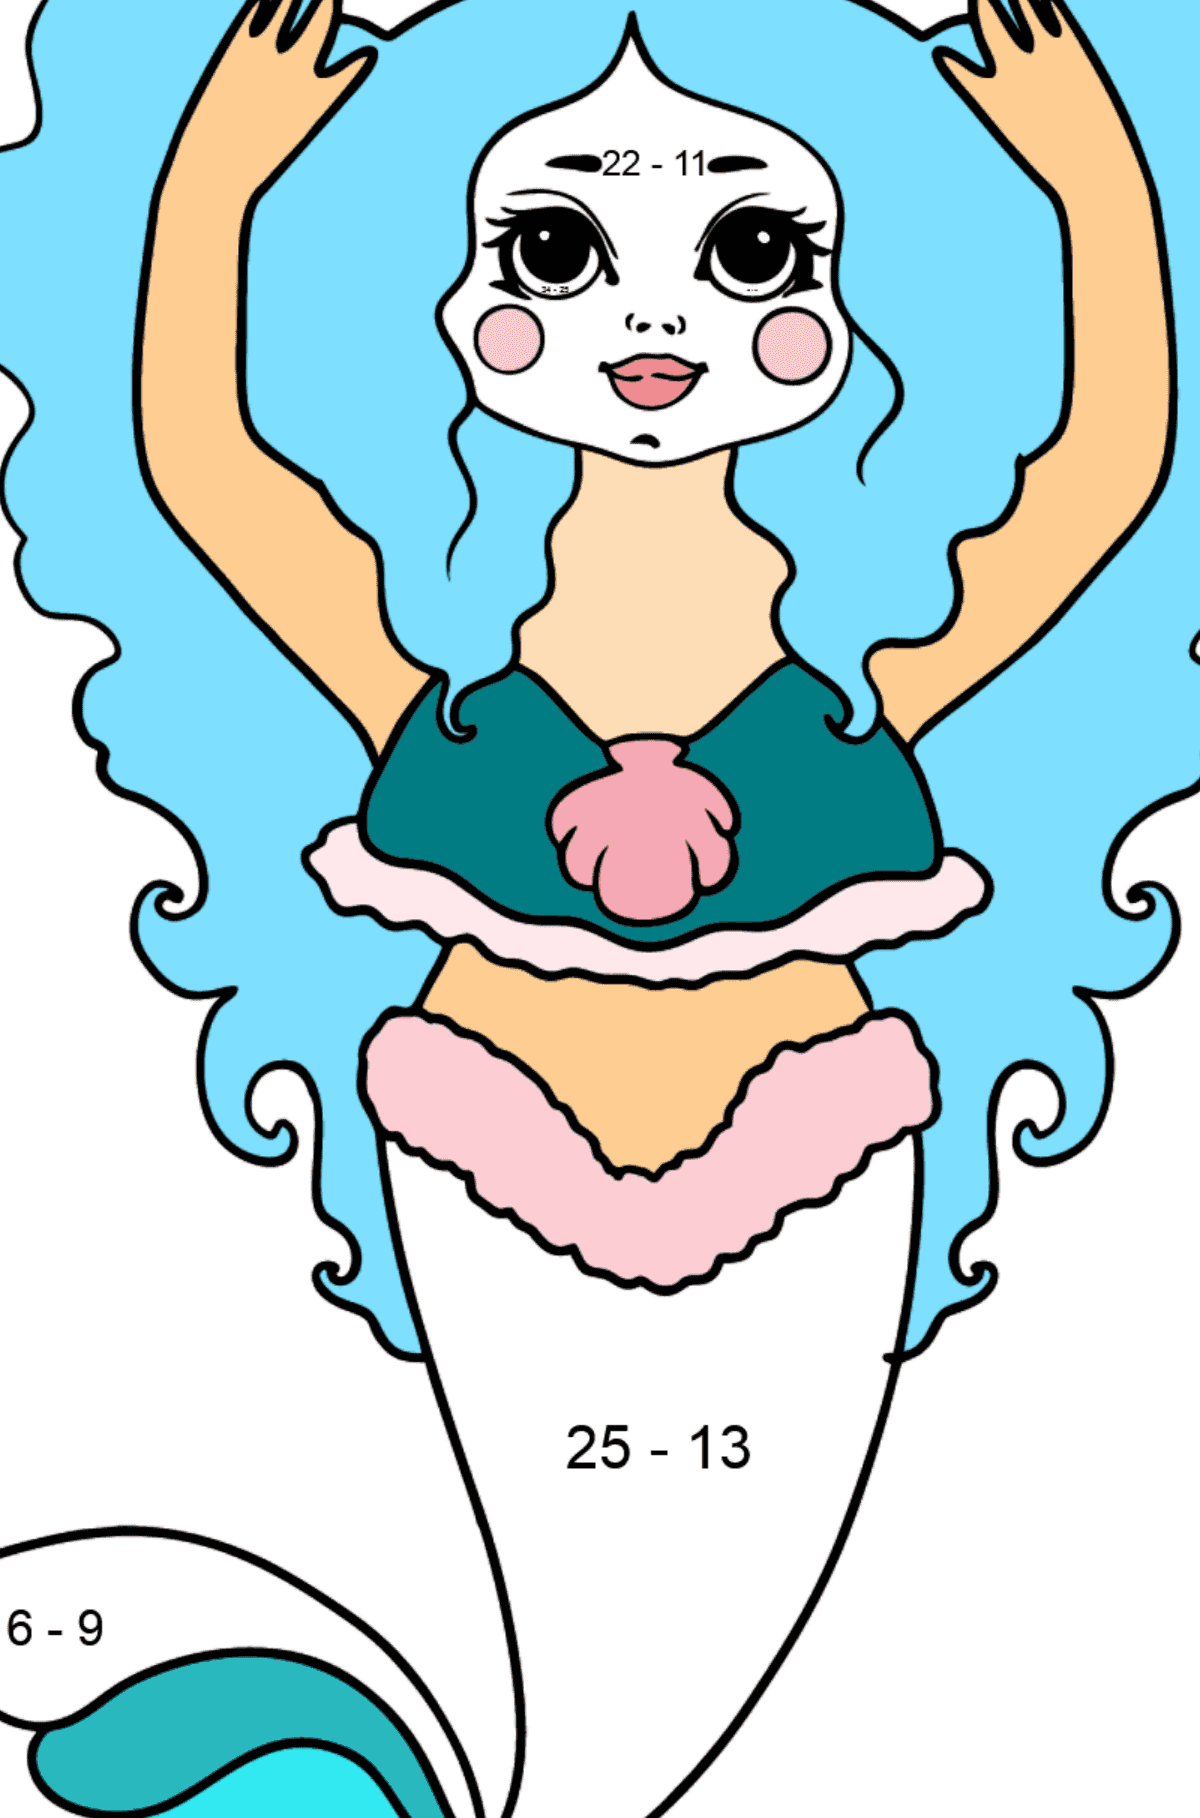 Mermaid with Blue Hair coloring page - Math Coloring - Subtraction for Kids